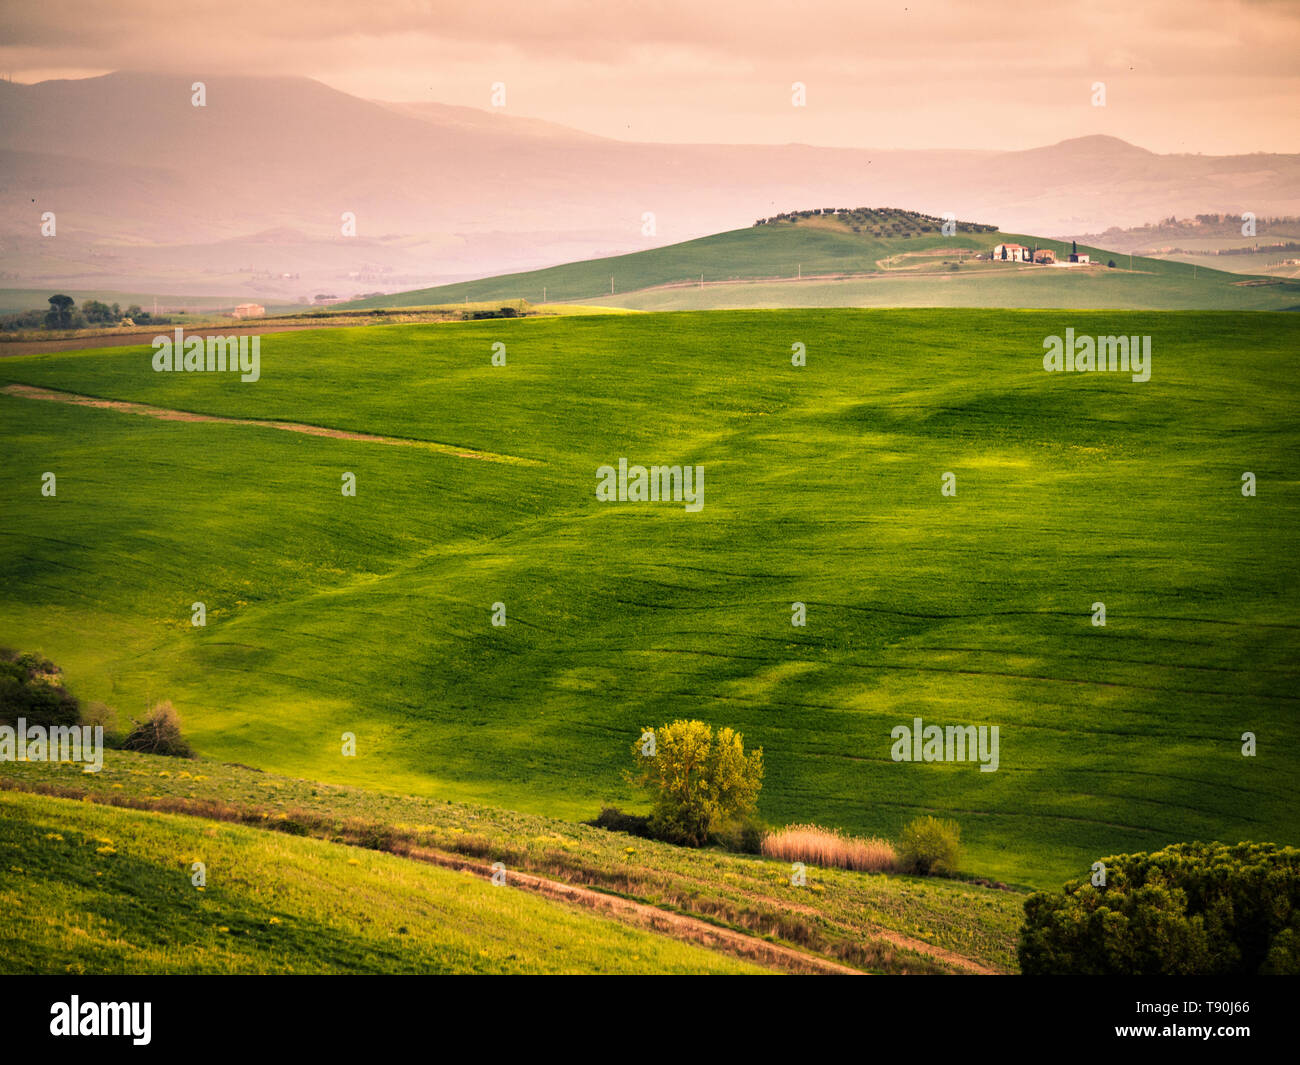 Landscape at sunset. Sinuous gorgeous green hills at dusk. Stock Photo